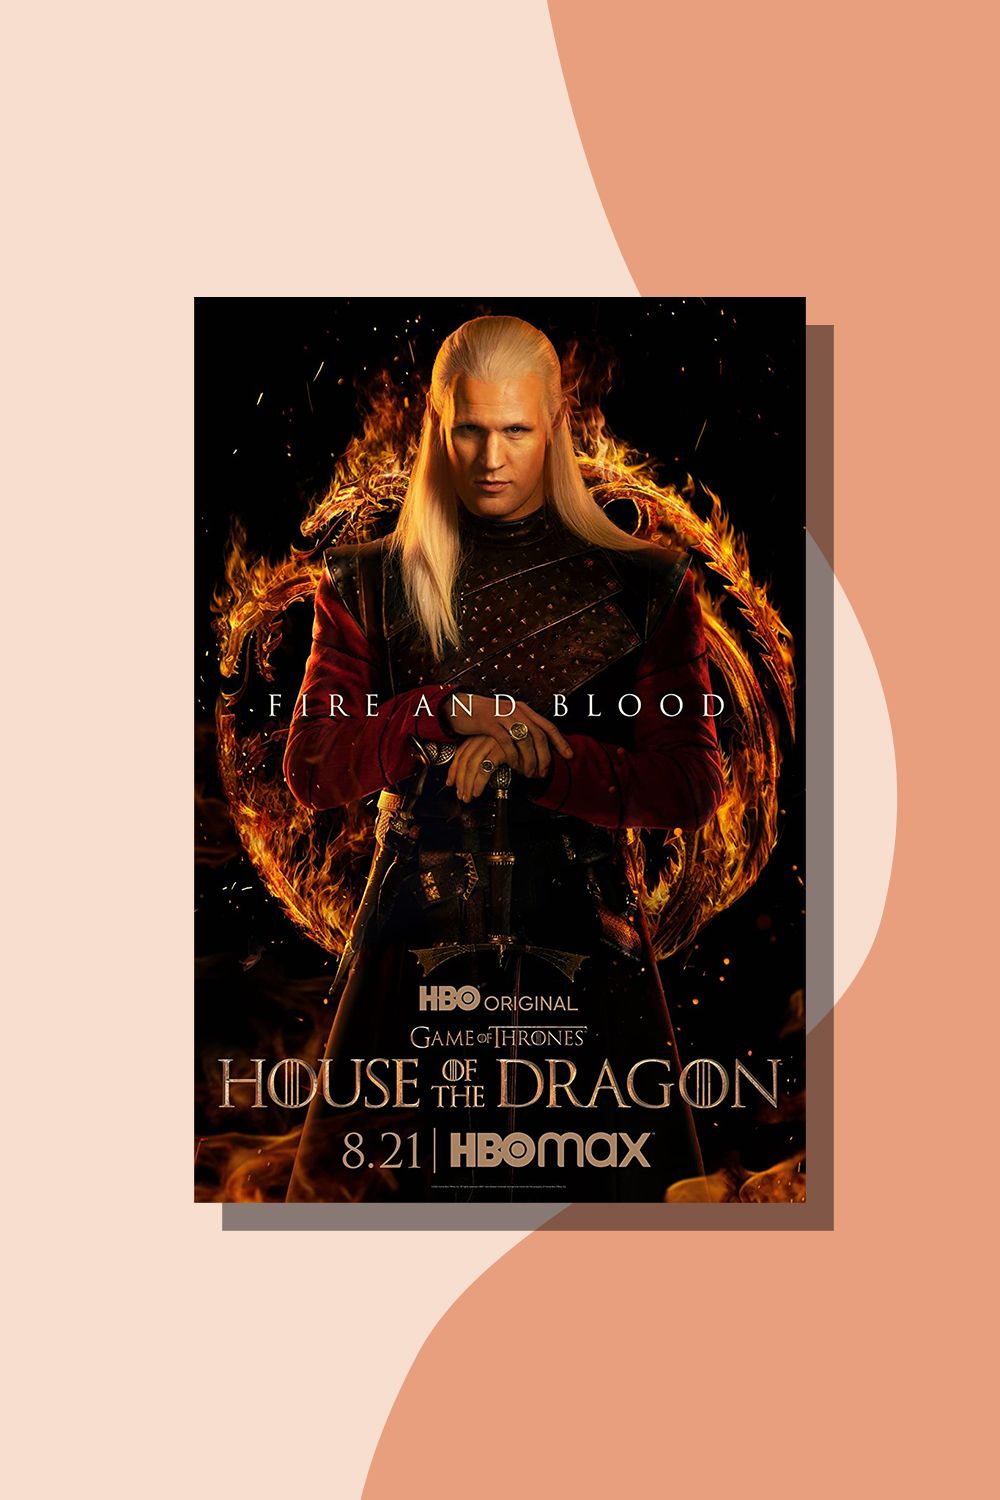 House Of The Dragon' Season 2 Posters Show Rhaenyra And Alicent At War,  'First Look' Coming Soon